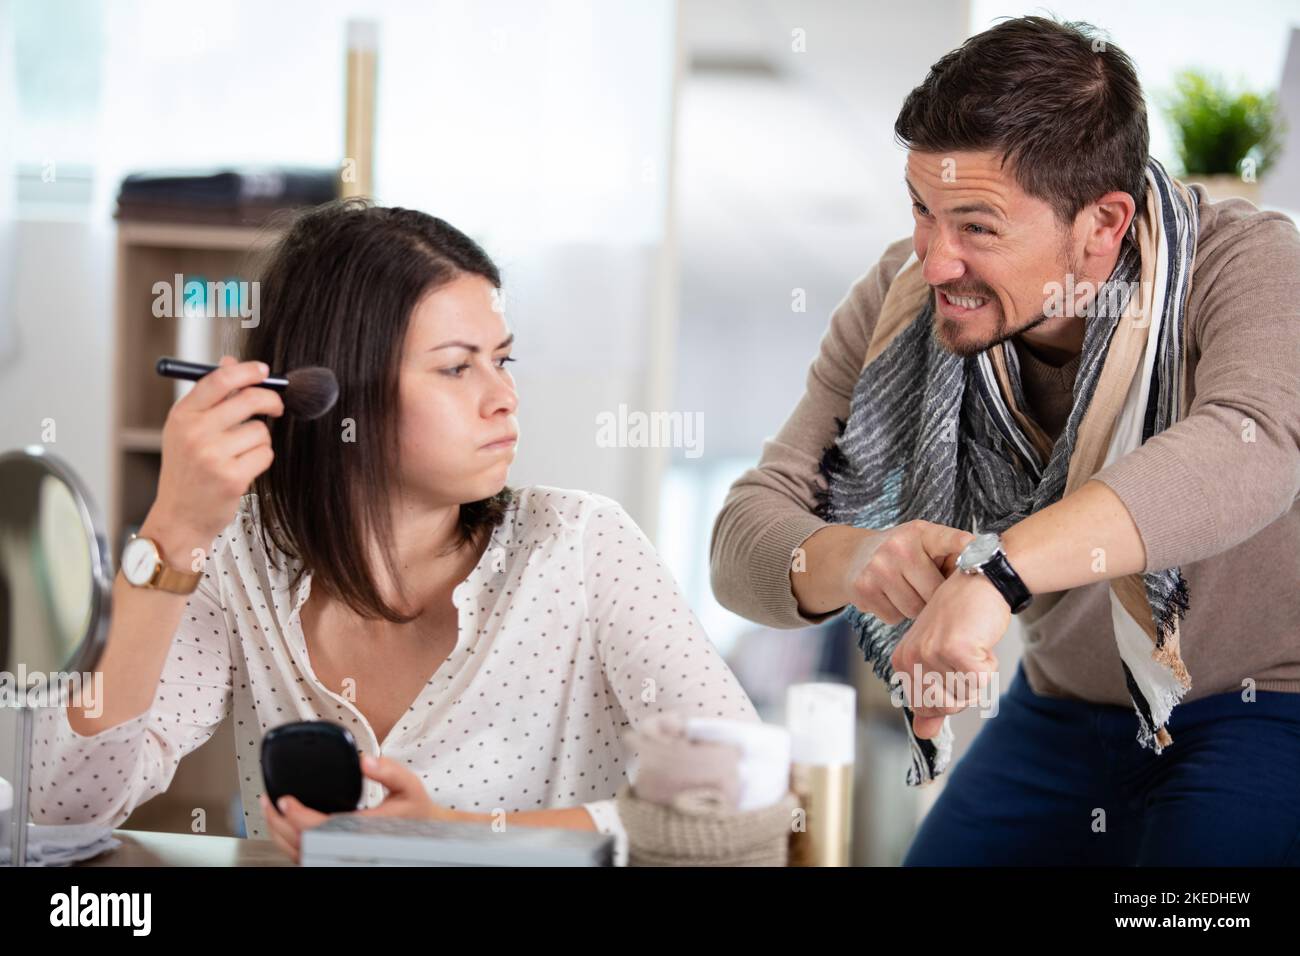 man hurry pointing to watch time Stock Photo